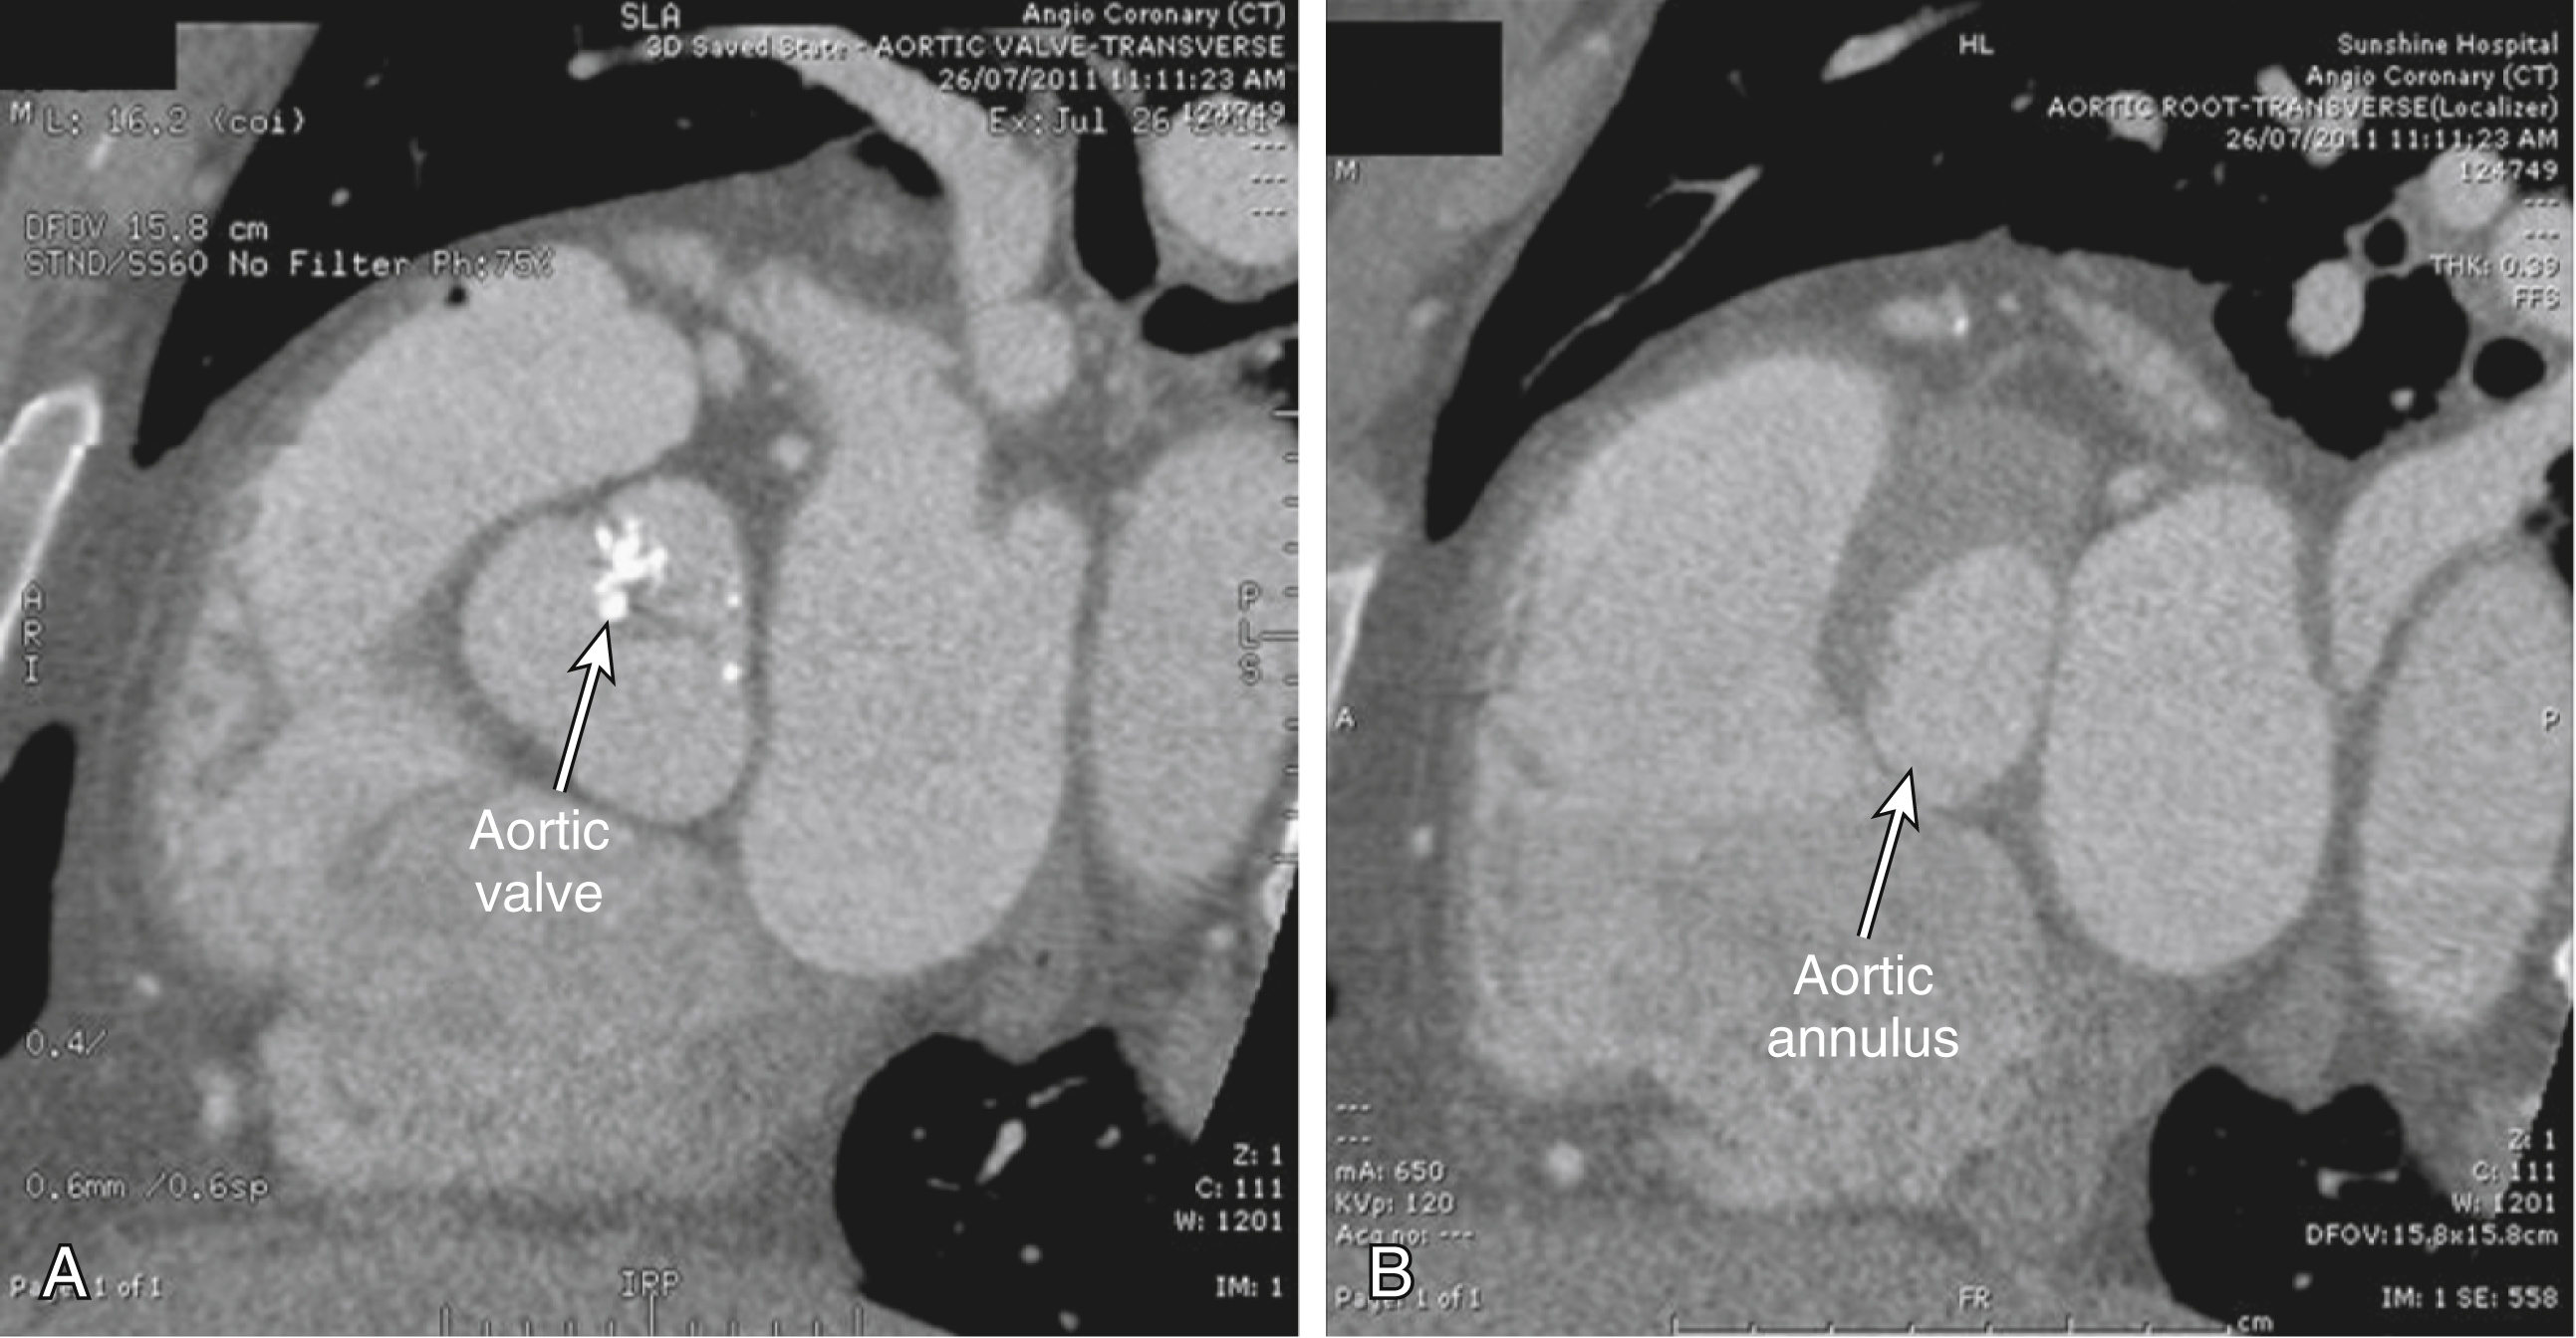 Fig. 50.7, (A) Transverse view of aortic valve. (B) Transverse view of aortic annulus reveals its oval shape.